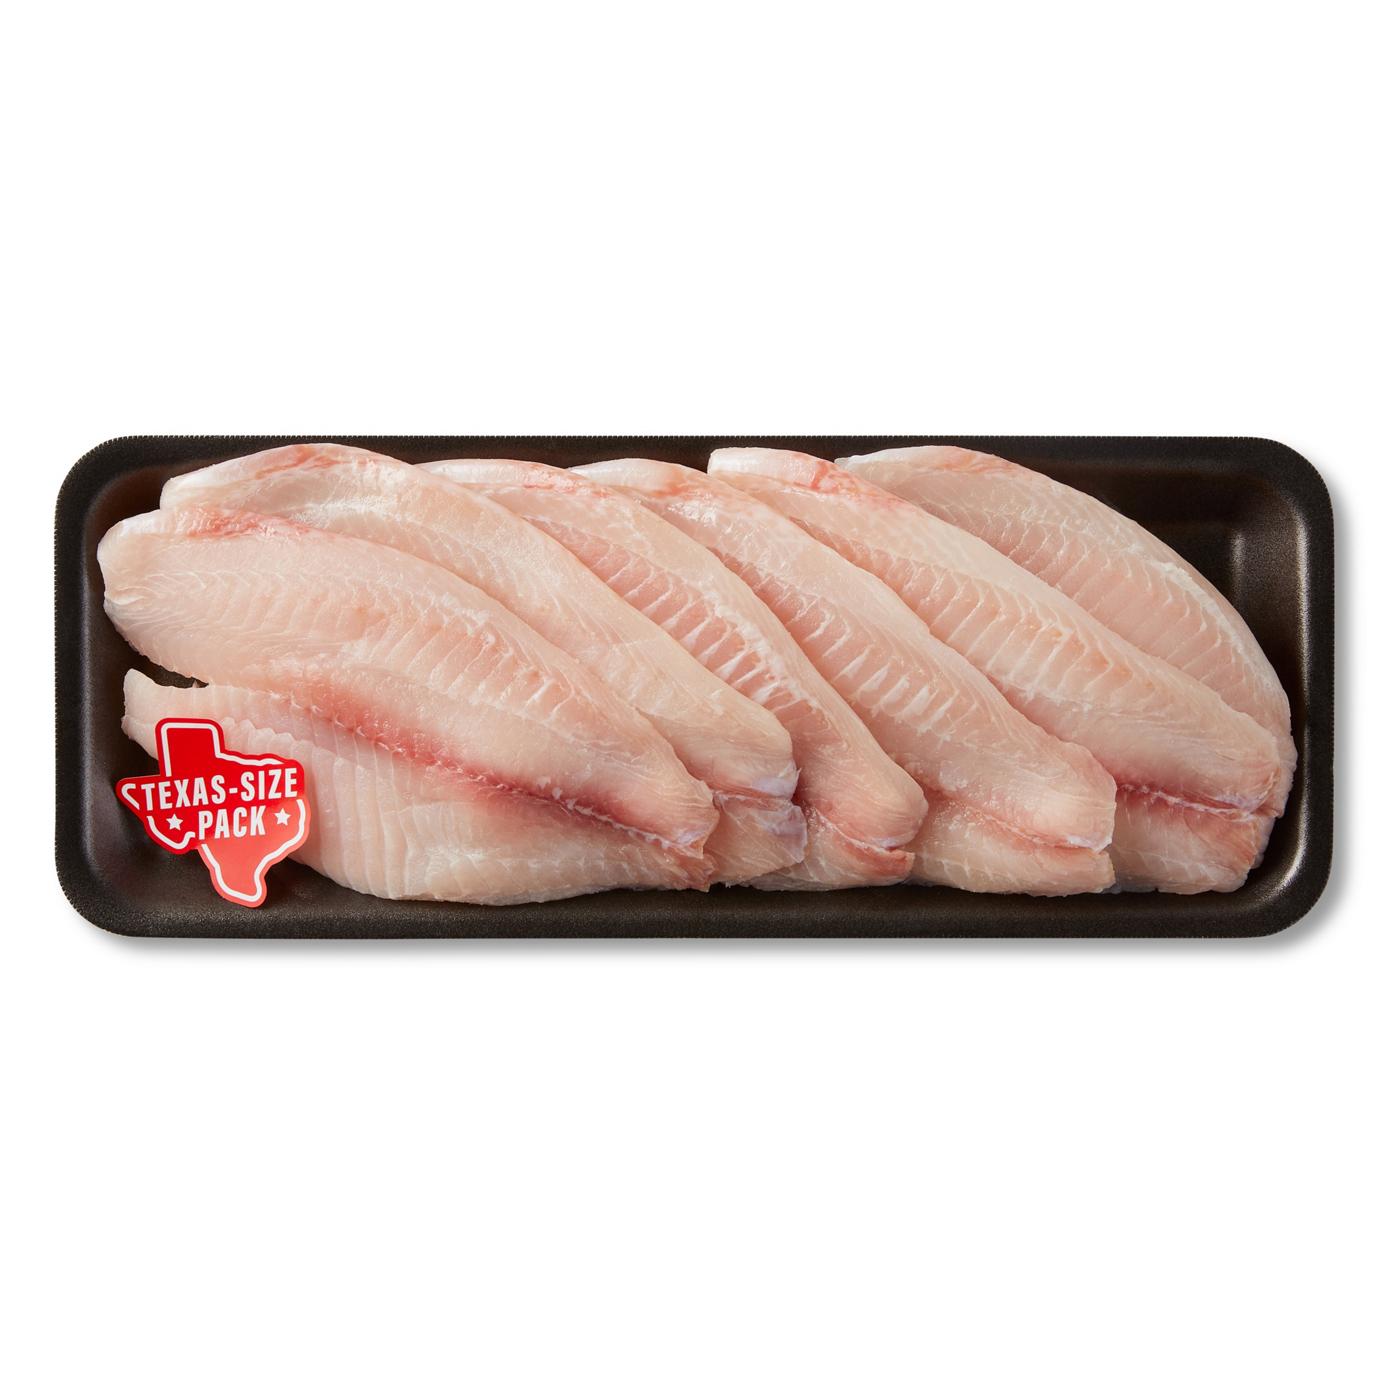 H-E-B Responsibly Raised Fresh Tilapia Fillets - Texas-Size Pack; image 1 of 2